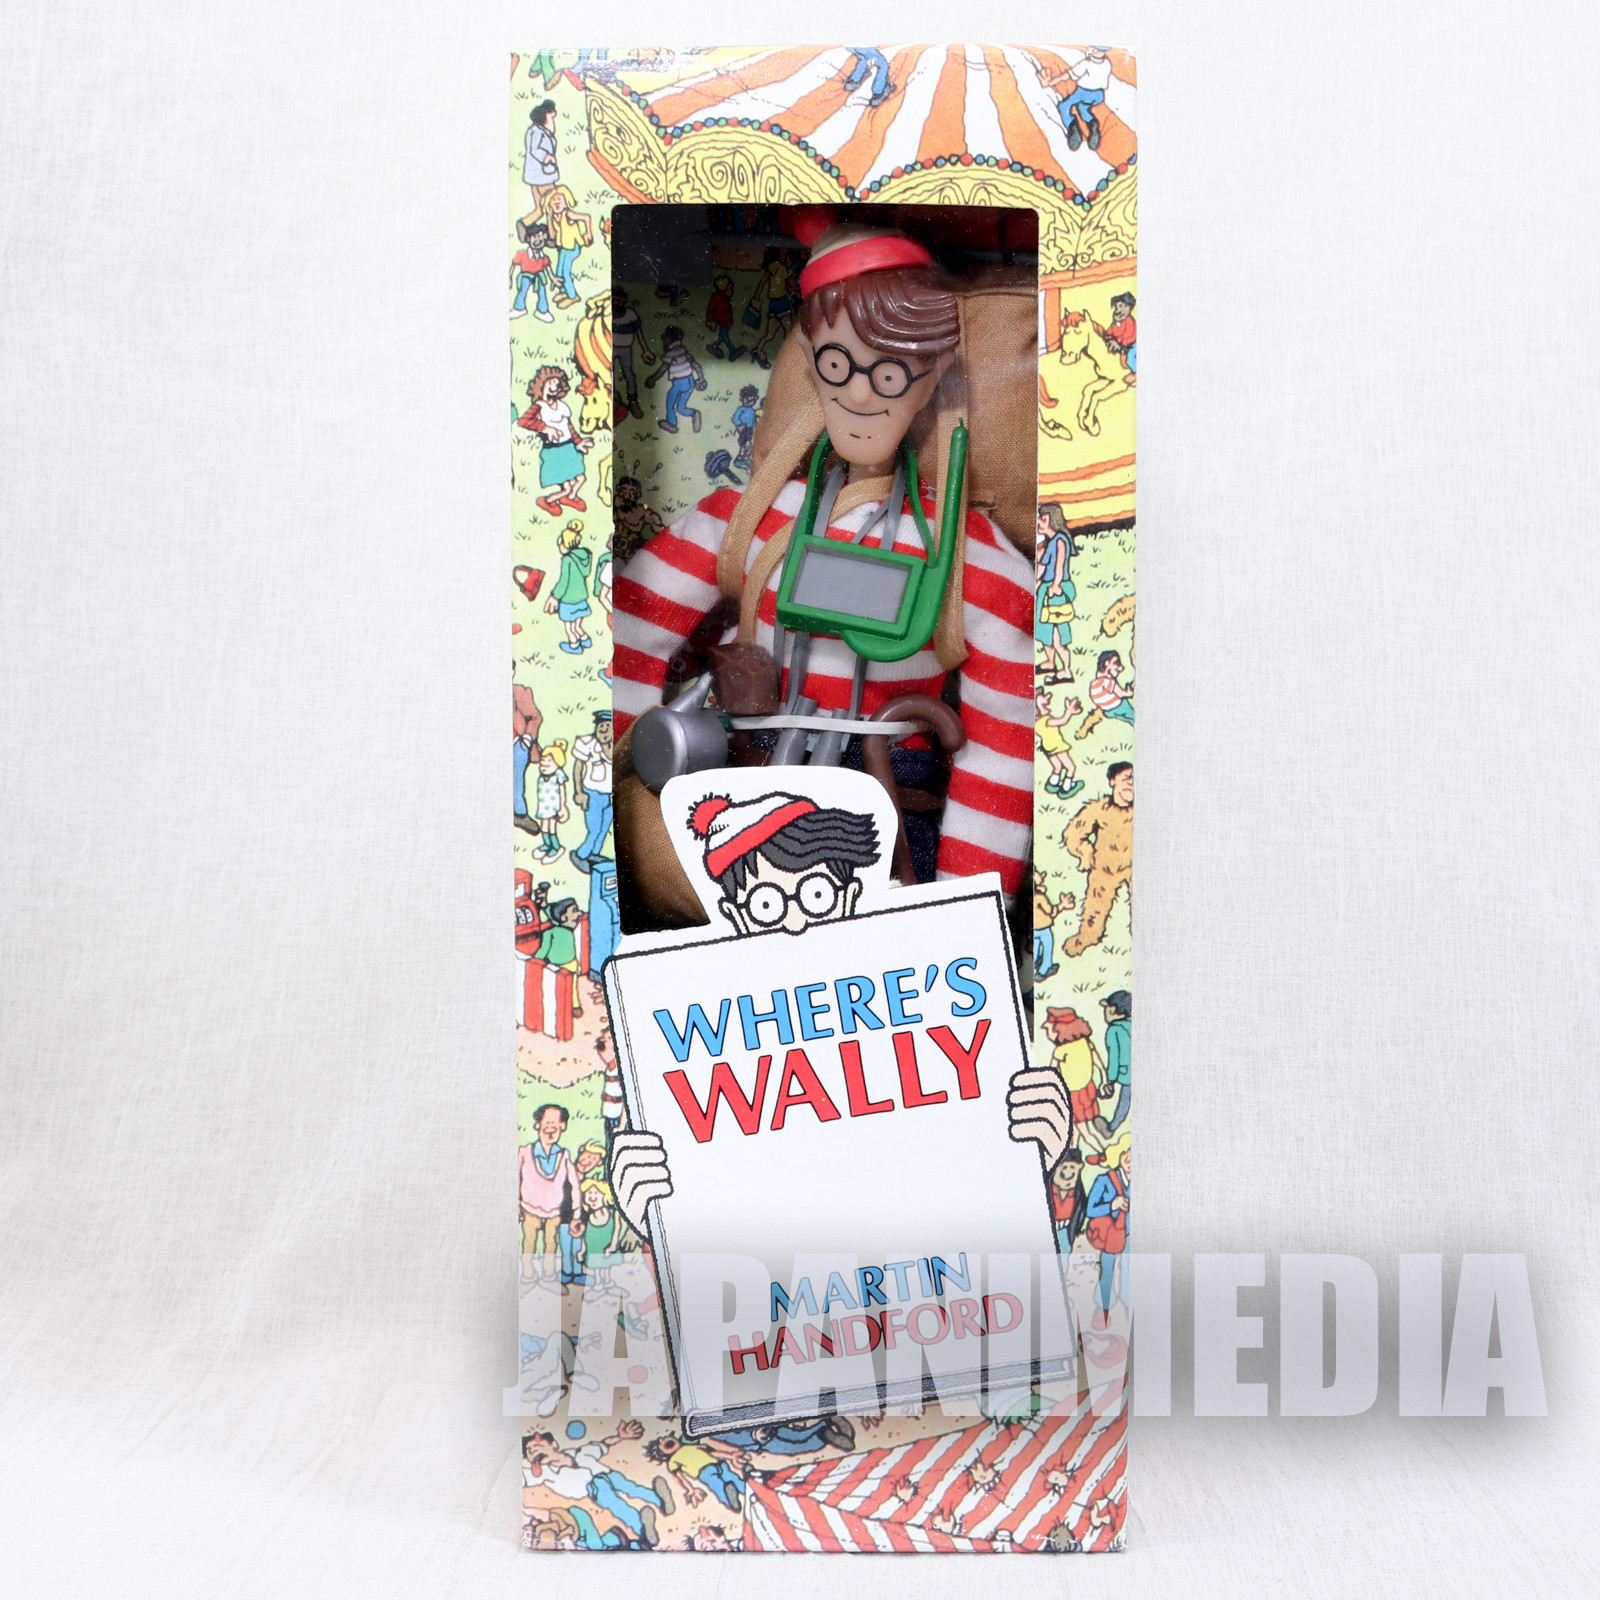 RARE! Where's Wally? Action Figure Doll 9 inch IVEX Martin Handford Kenrick